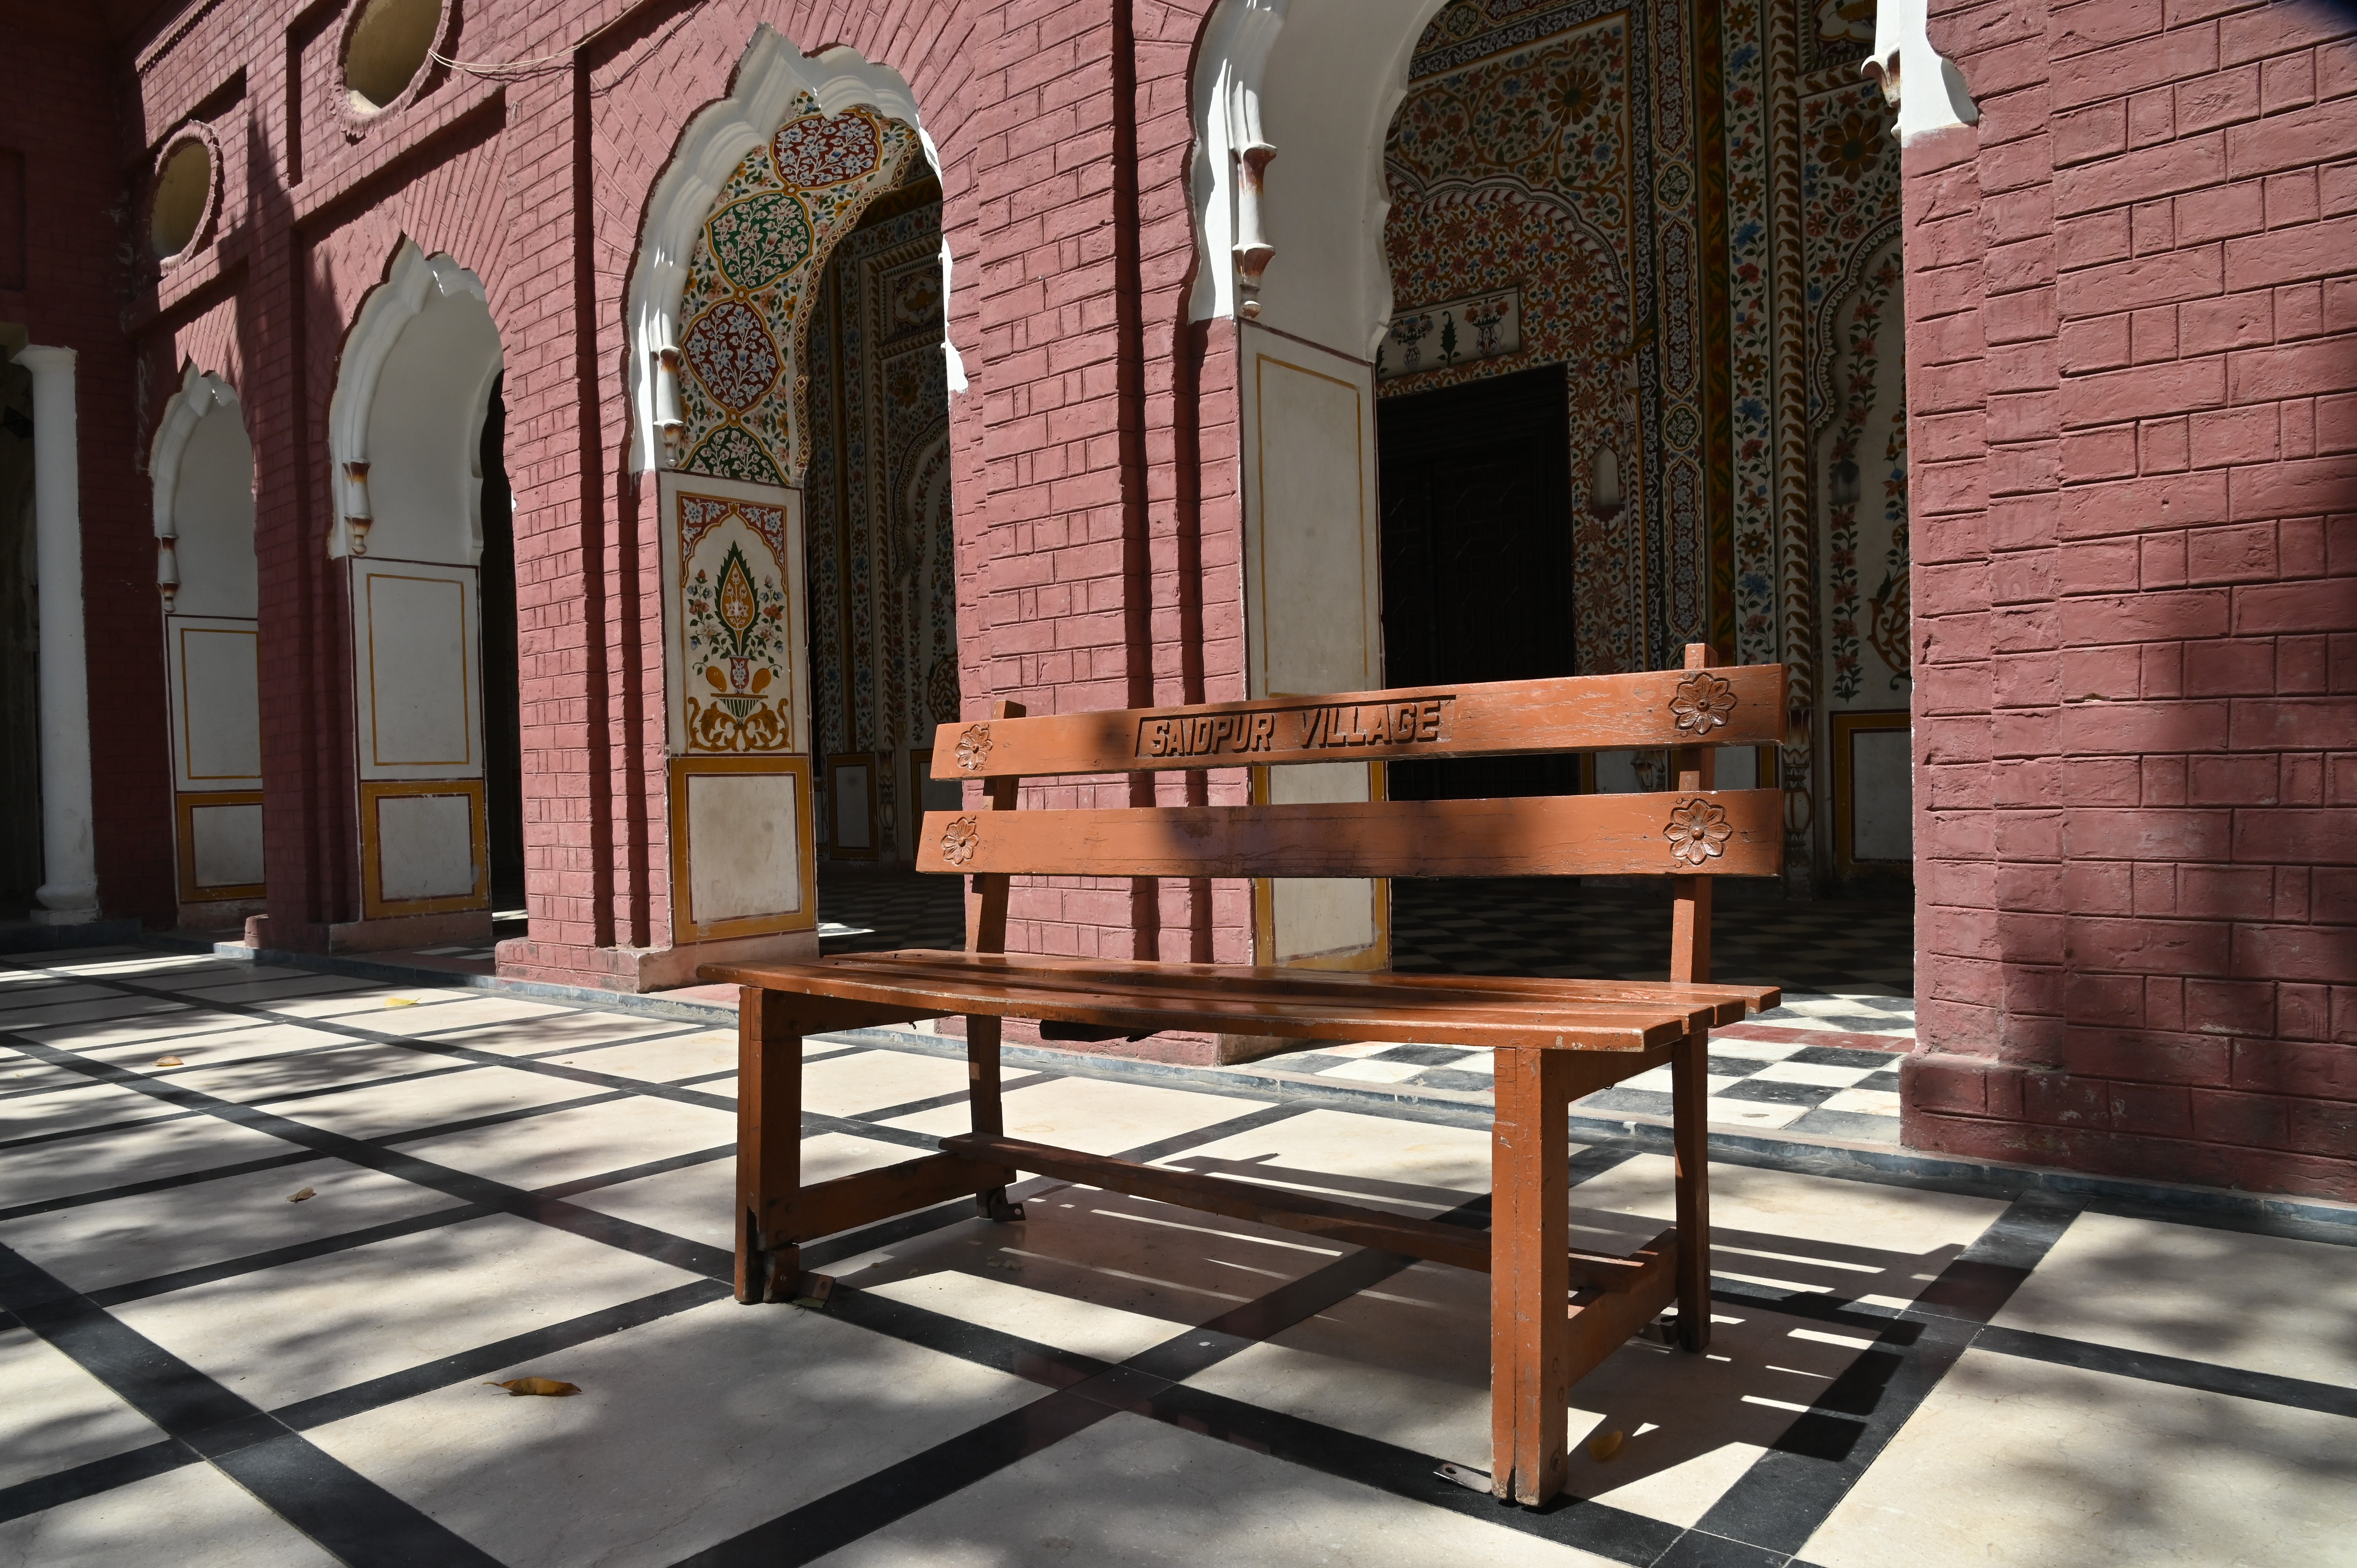 The Wooden bench at the courtyard of Gurdwara Singh Sabah